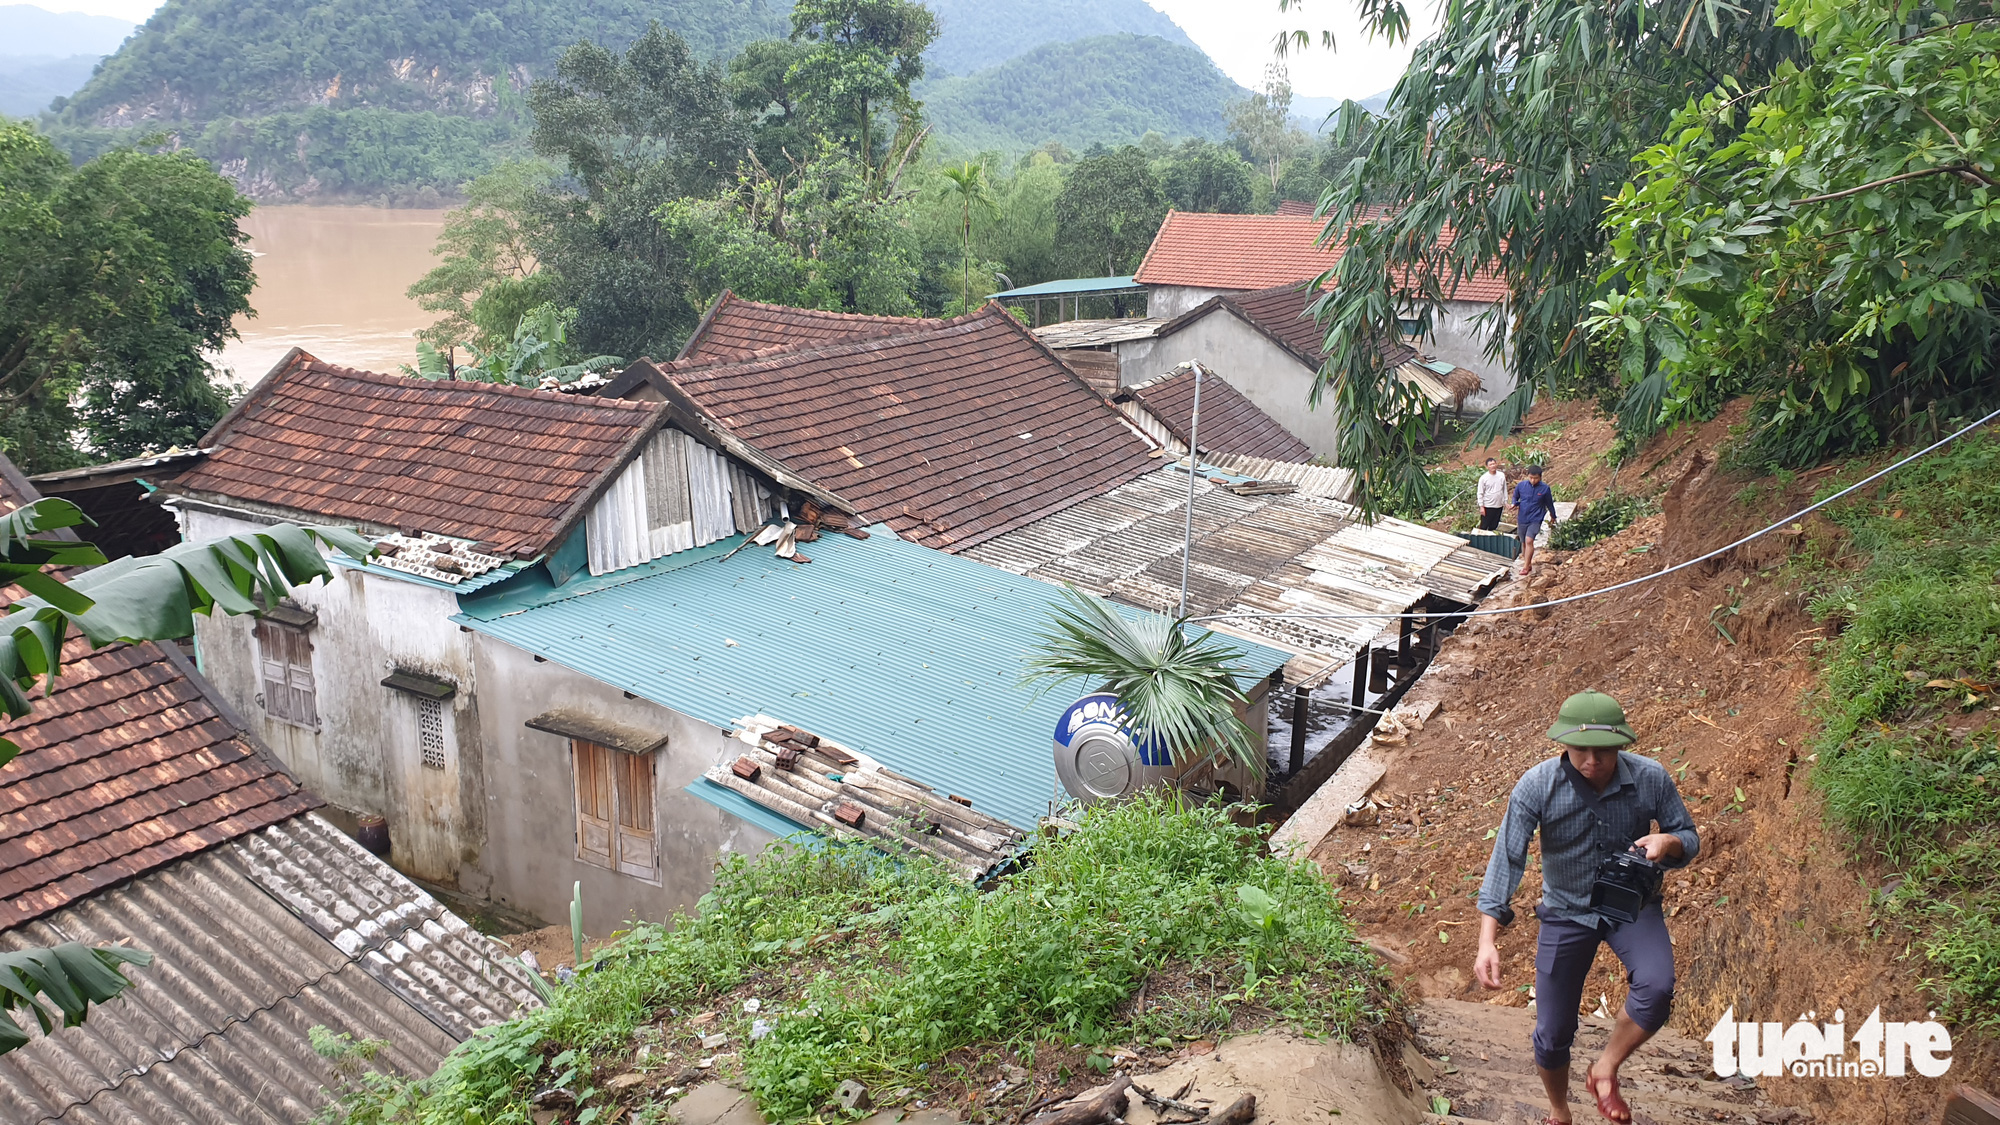 Housed are located at the foot of Keo Mountain in Quang Binh Province, Vietnam. Photo: Tuoi Tre